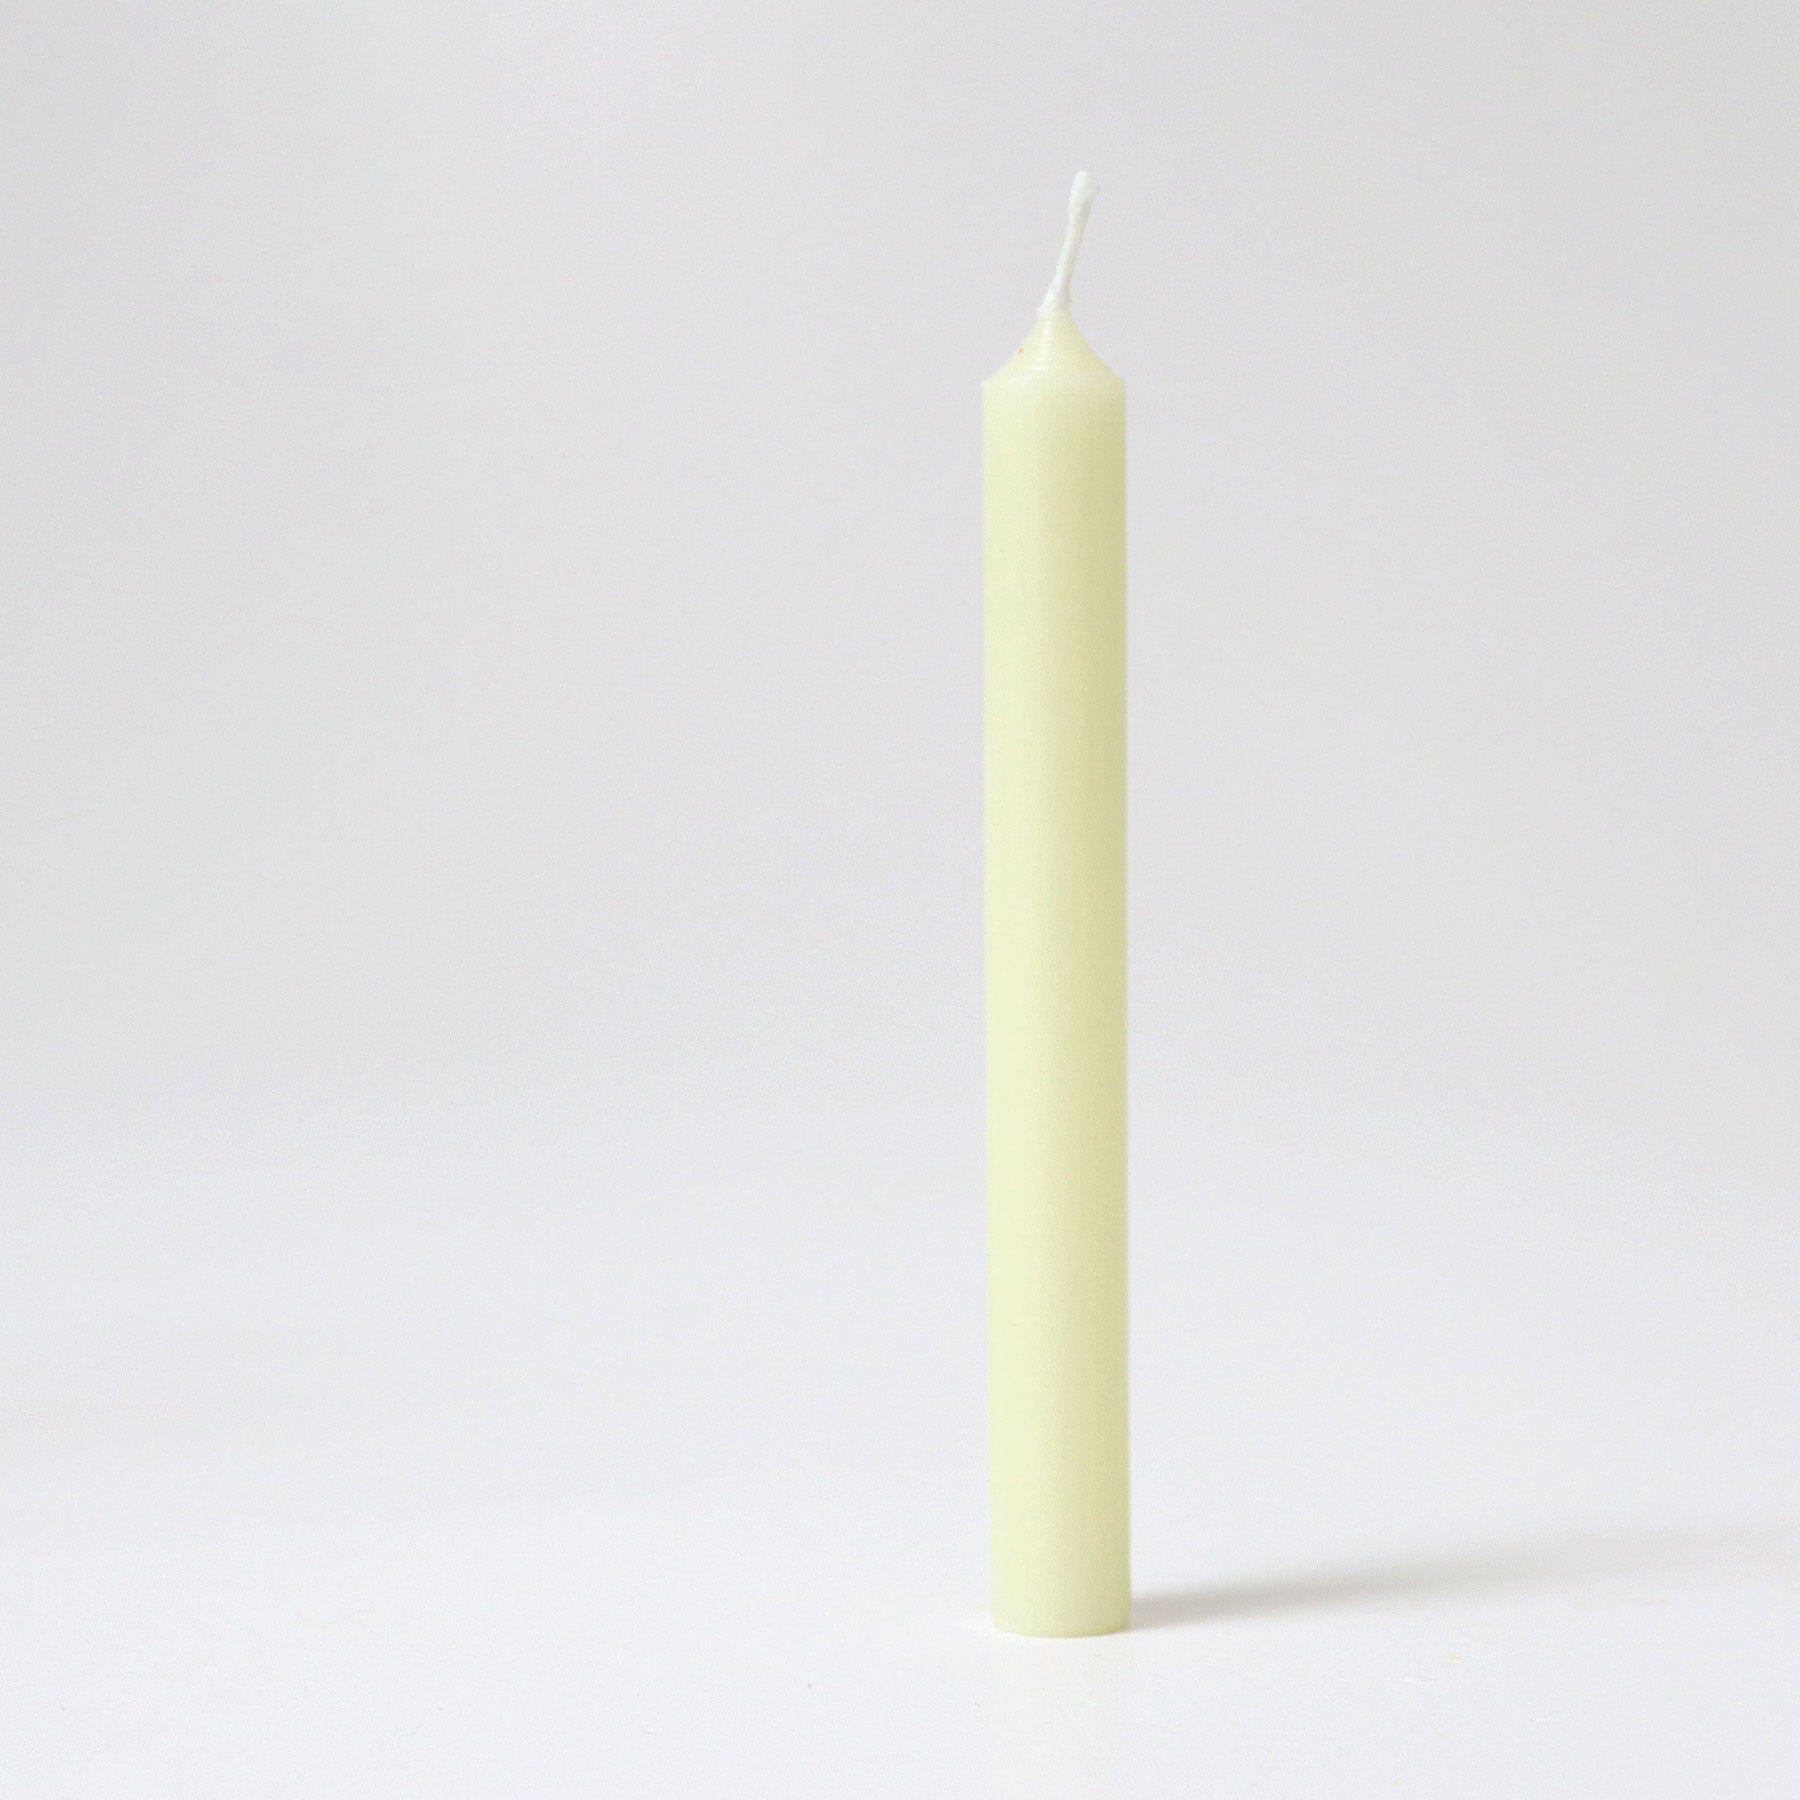 Creme Beeswax Candles (10%) - 12 pc. Grimm's Lil Tulips